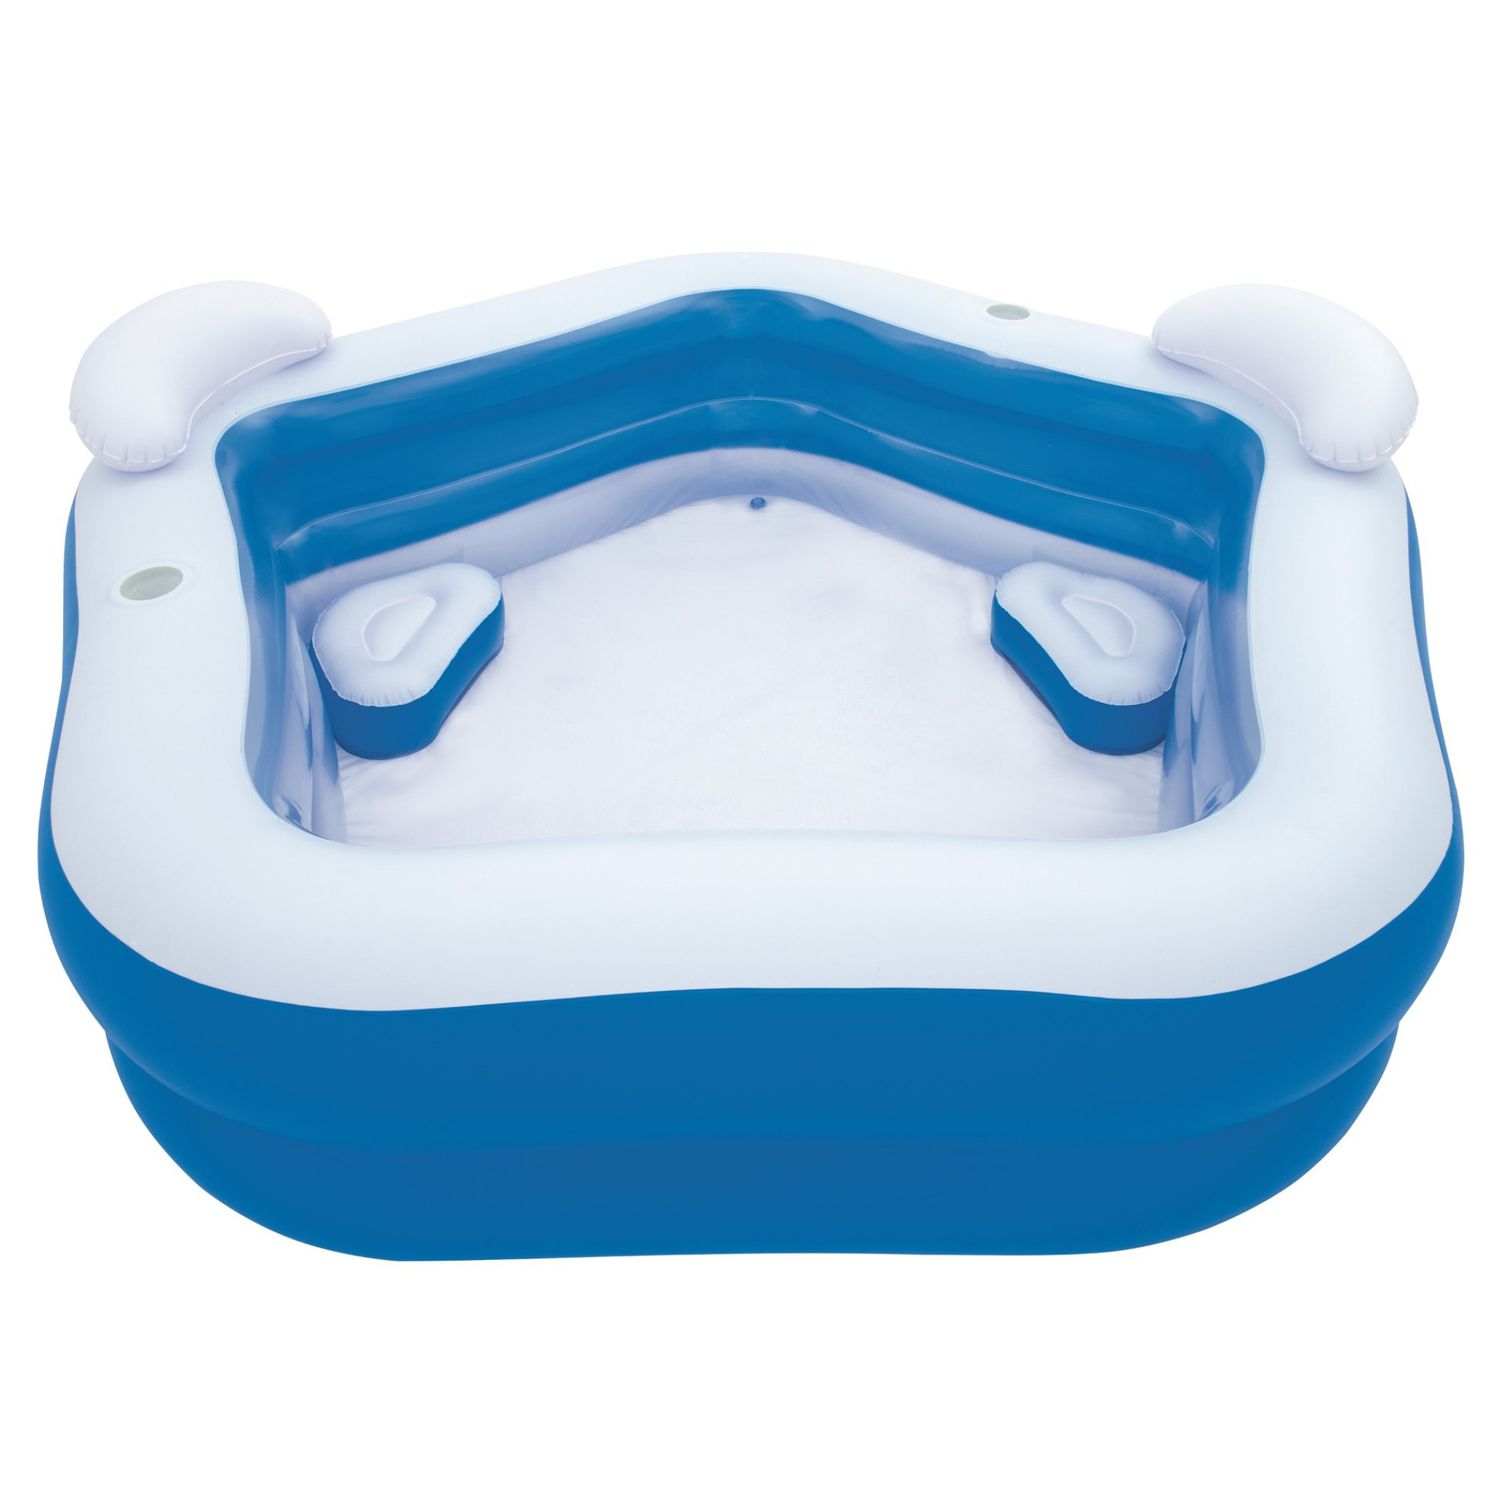 FREE Small Kids Swimming Pool at Kohls After Cash Back Offer! - Thrifty NW  Mom